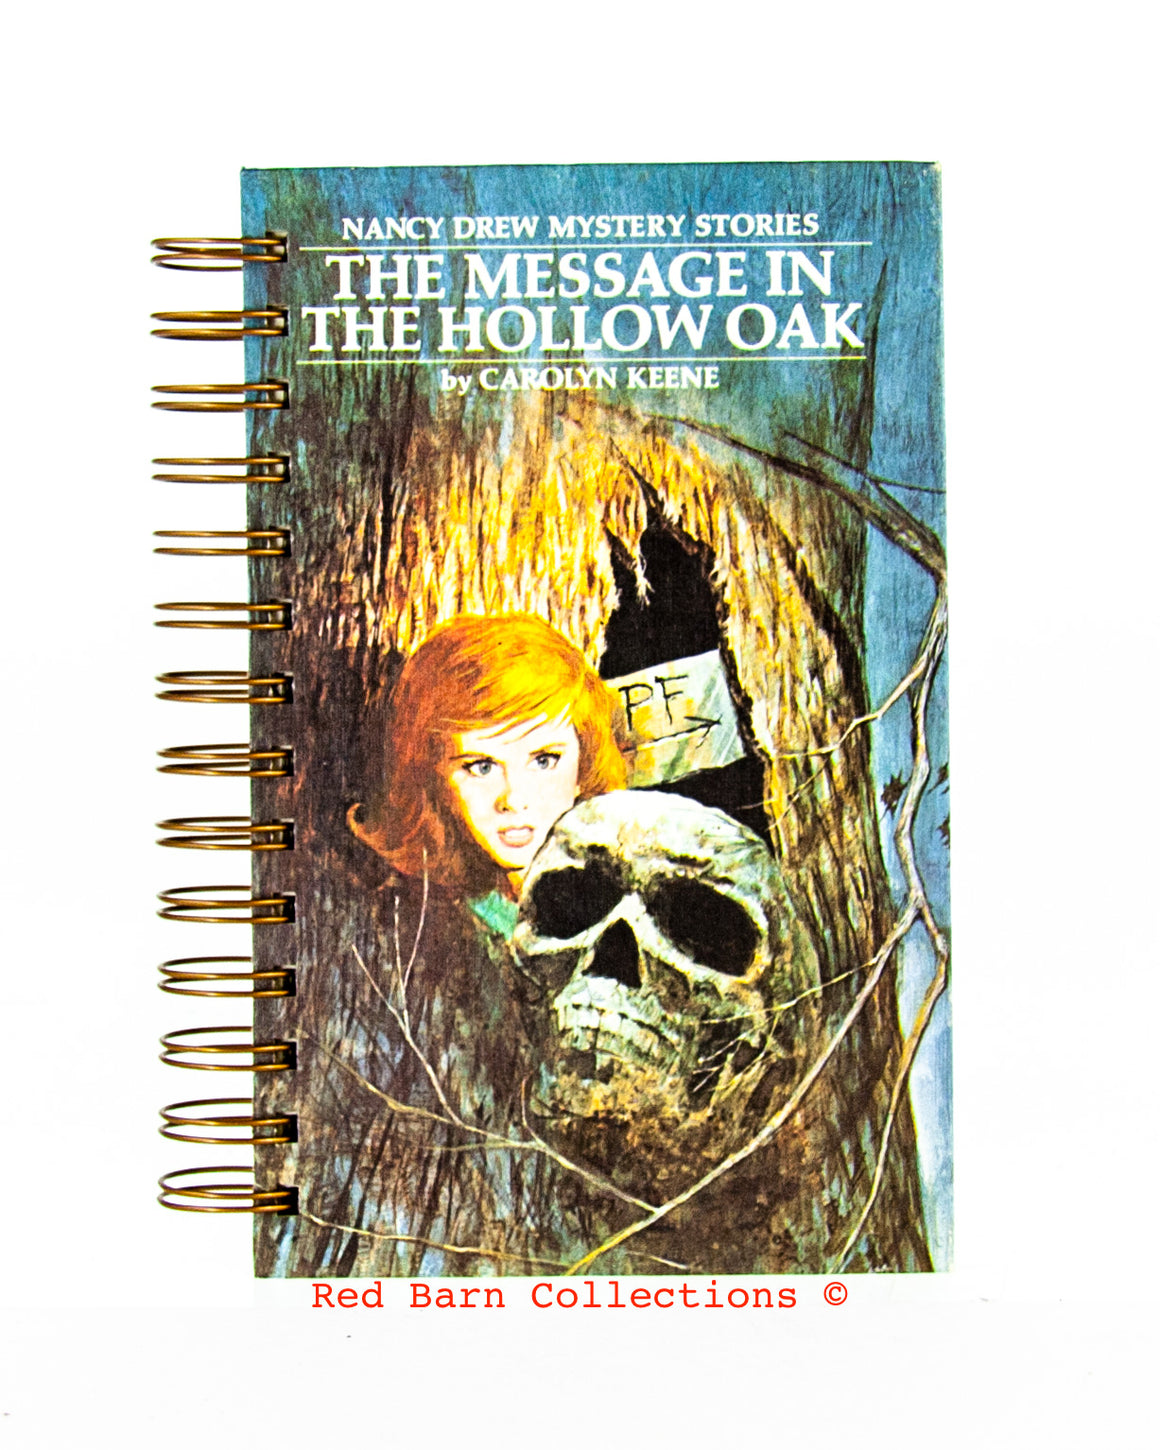 Nancy Drew #12 - The Message in the Hollow Oak-Red Barn Collections